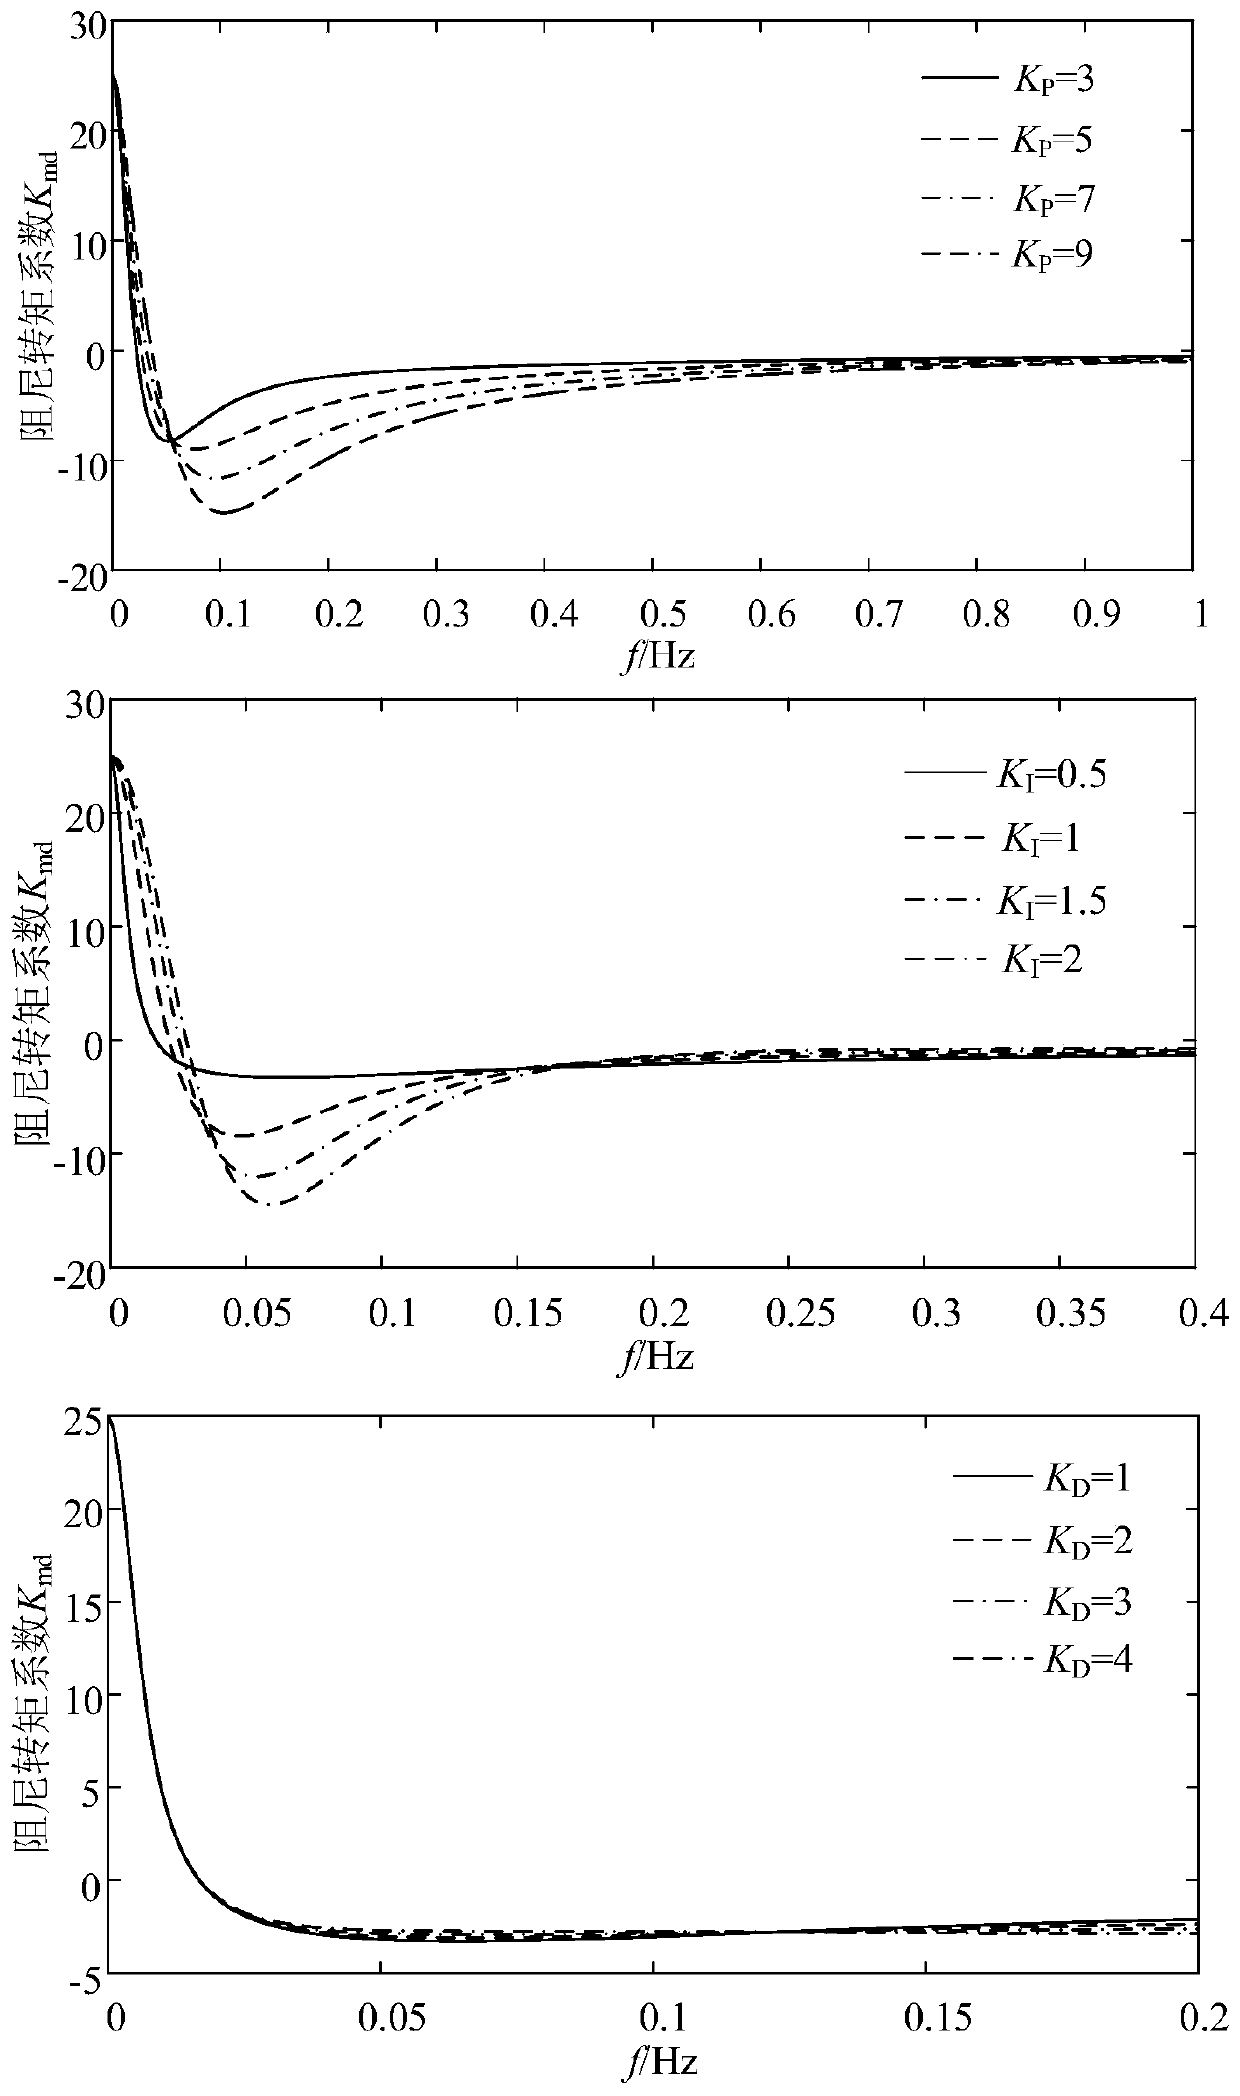 Ultra-low frequency oscillation inhibition method based on root locus group